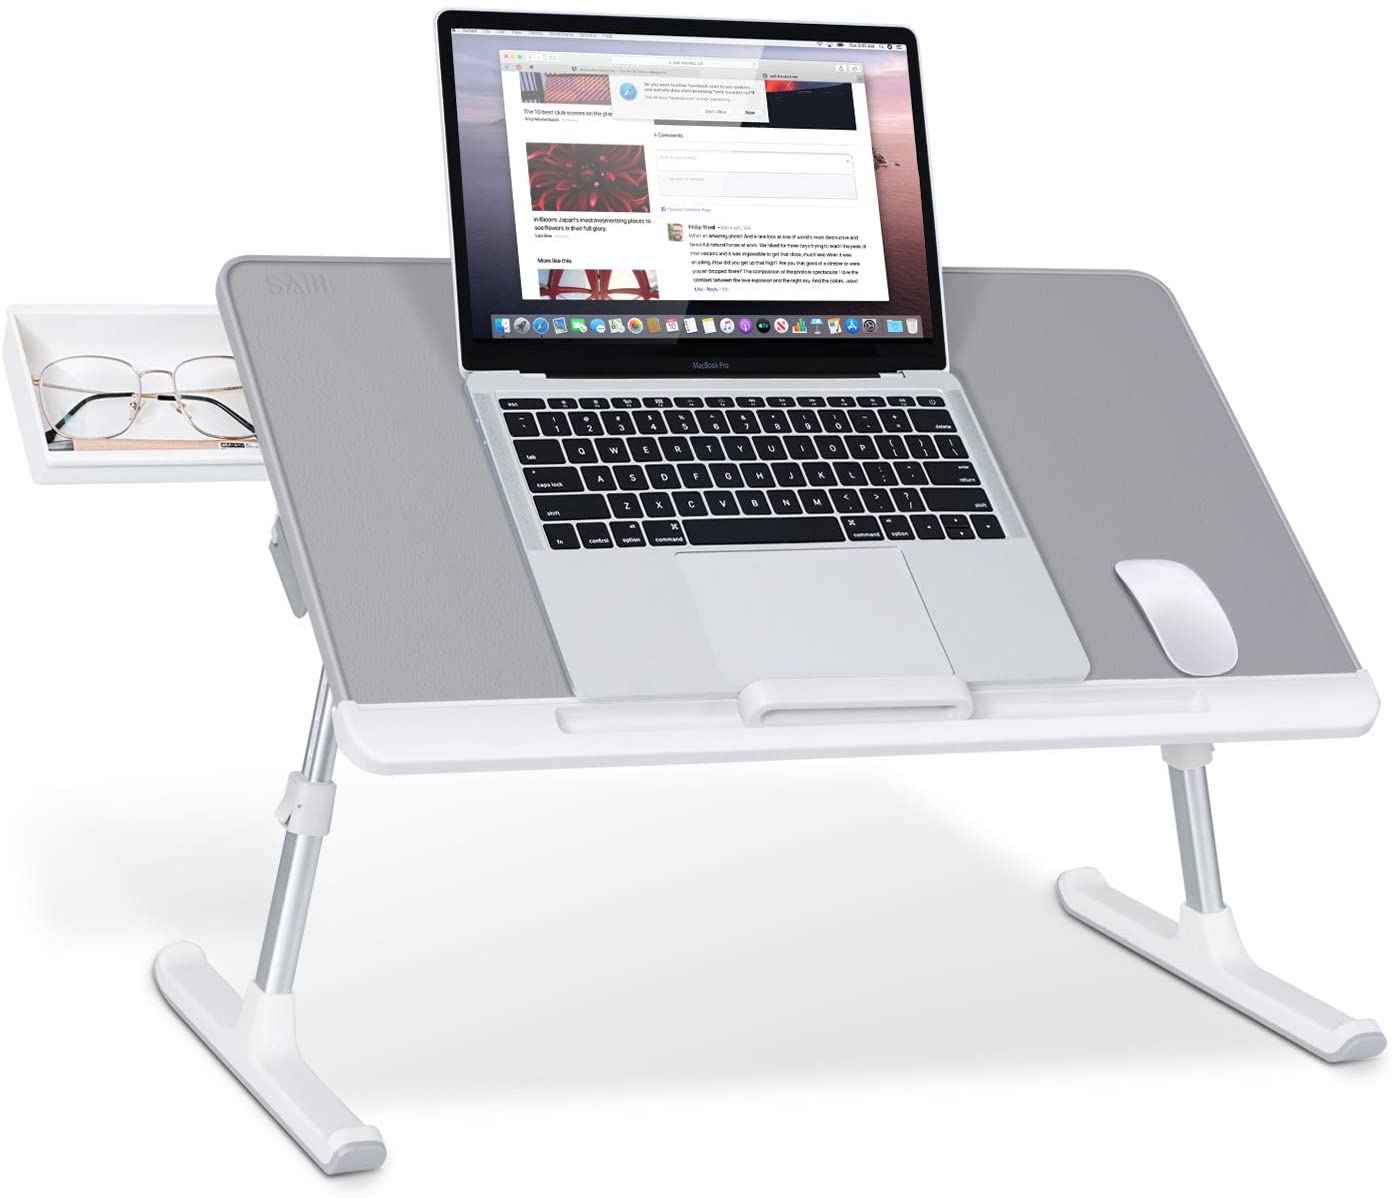 Foldable Laptop Bed Table or stand.